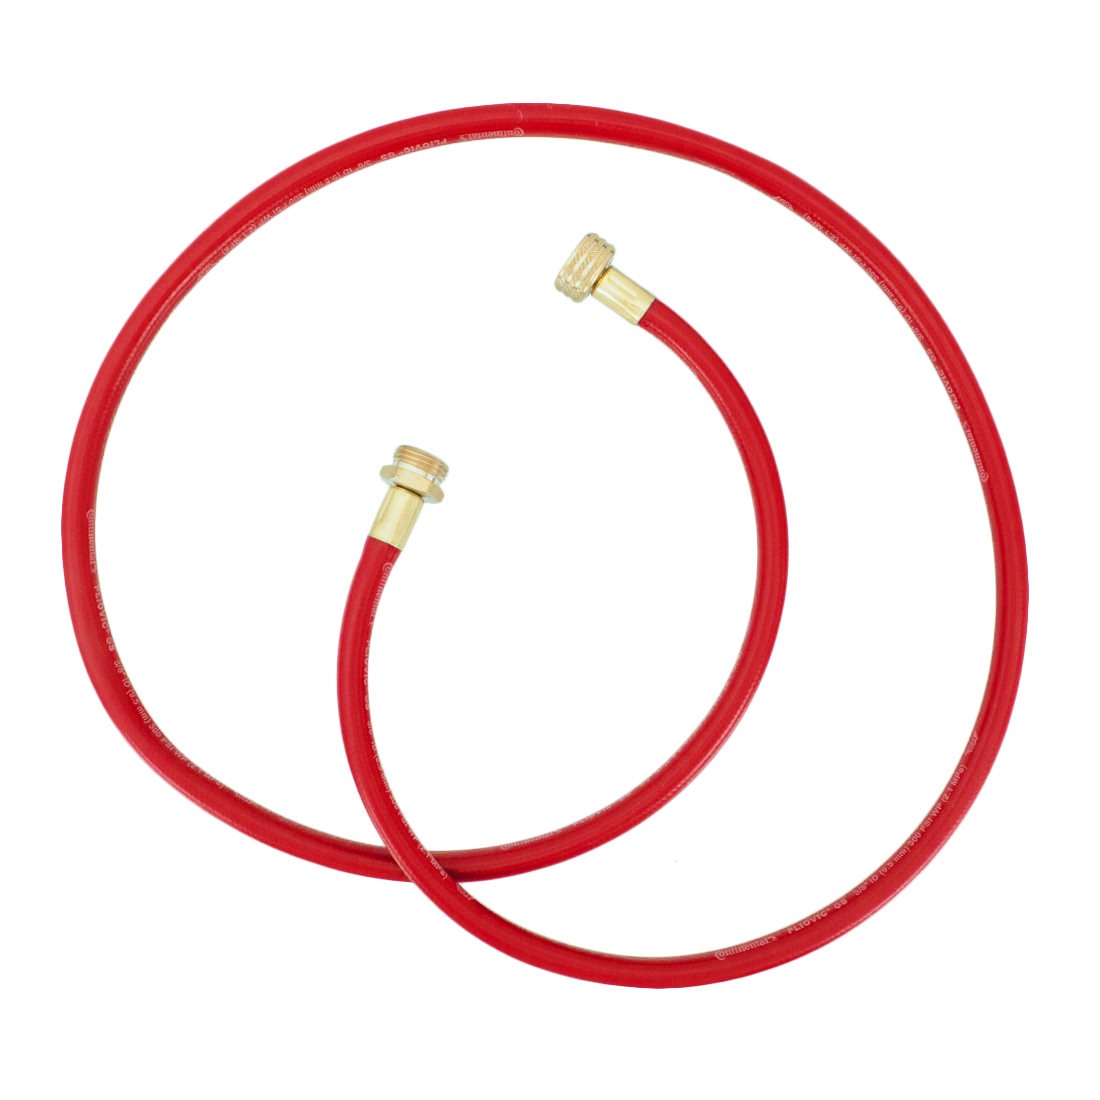 XERO Whip Line / Upgraded Waste Line - 6 Foot Red Hose Front View